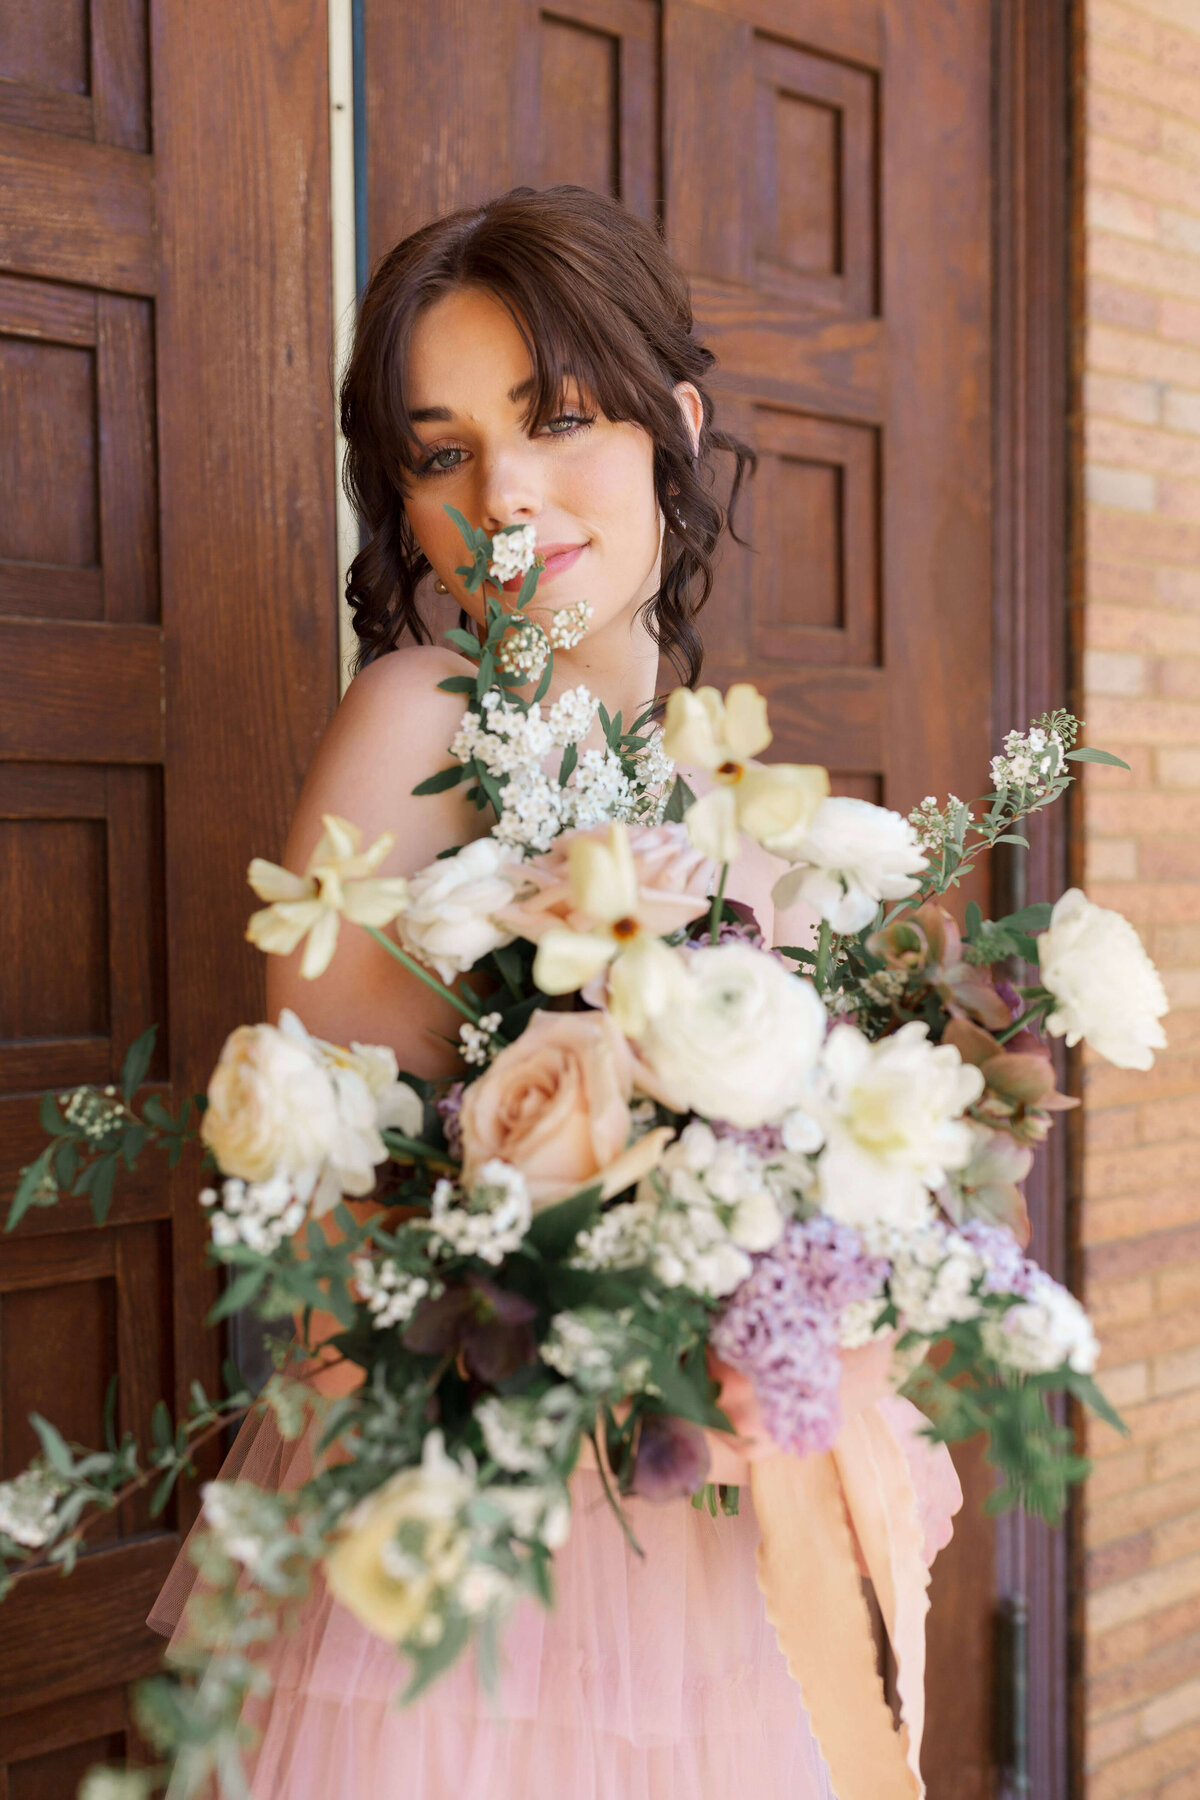 woman holding large bouquet of flowers in ivory, peach, pale pink, lavender and greenery